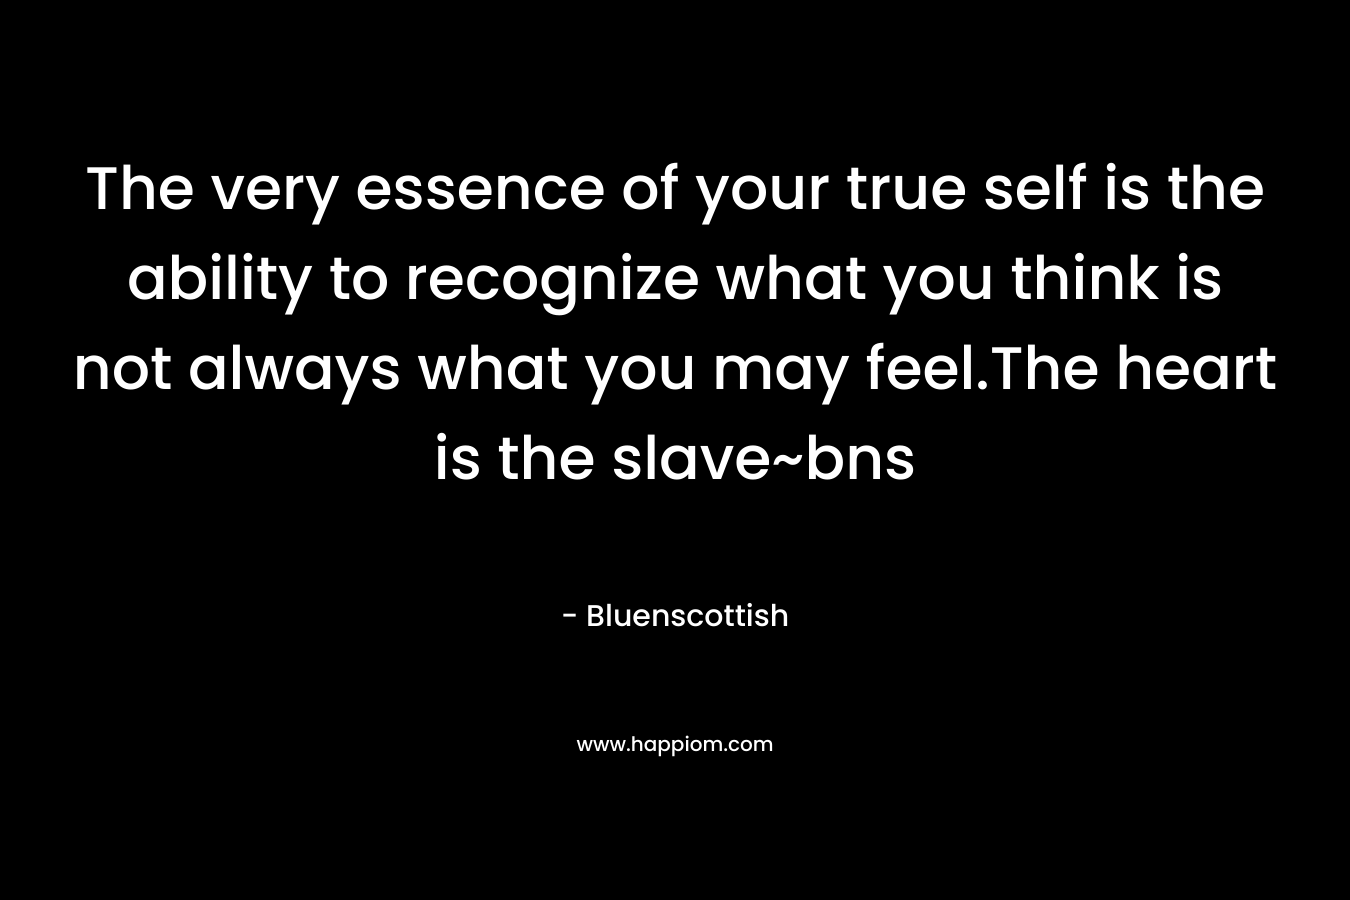 The very essence of your true self is the ability to recognize what you think is not always what you may feel.The heart is the slave~bns